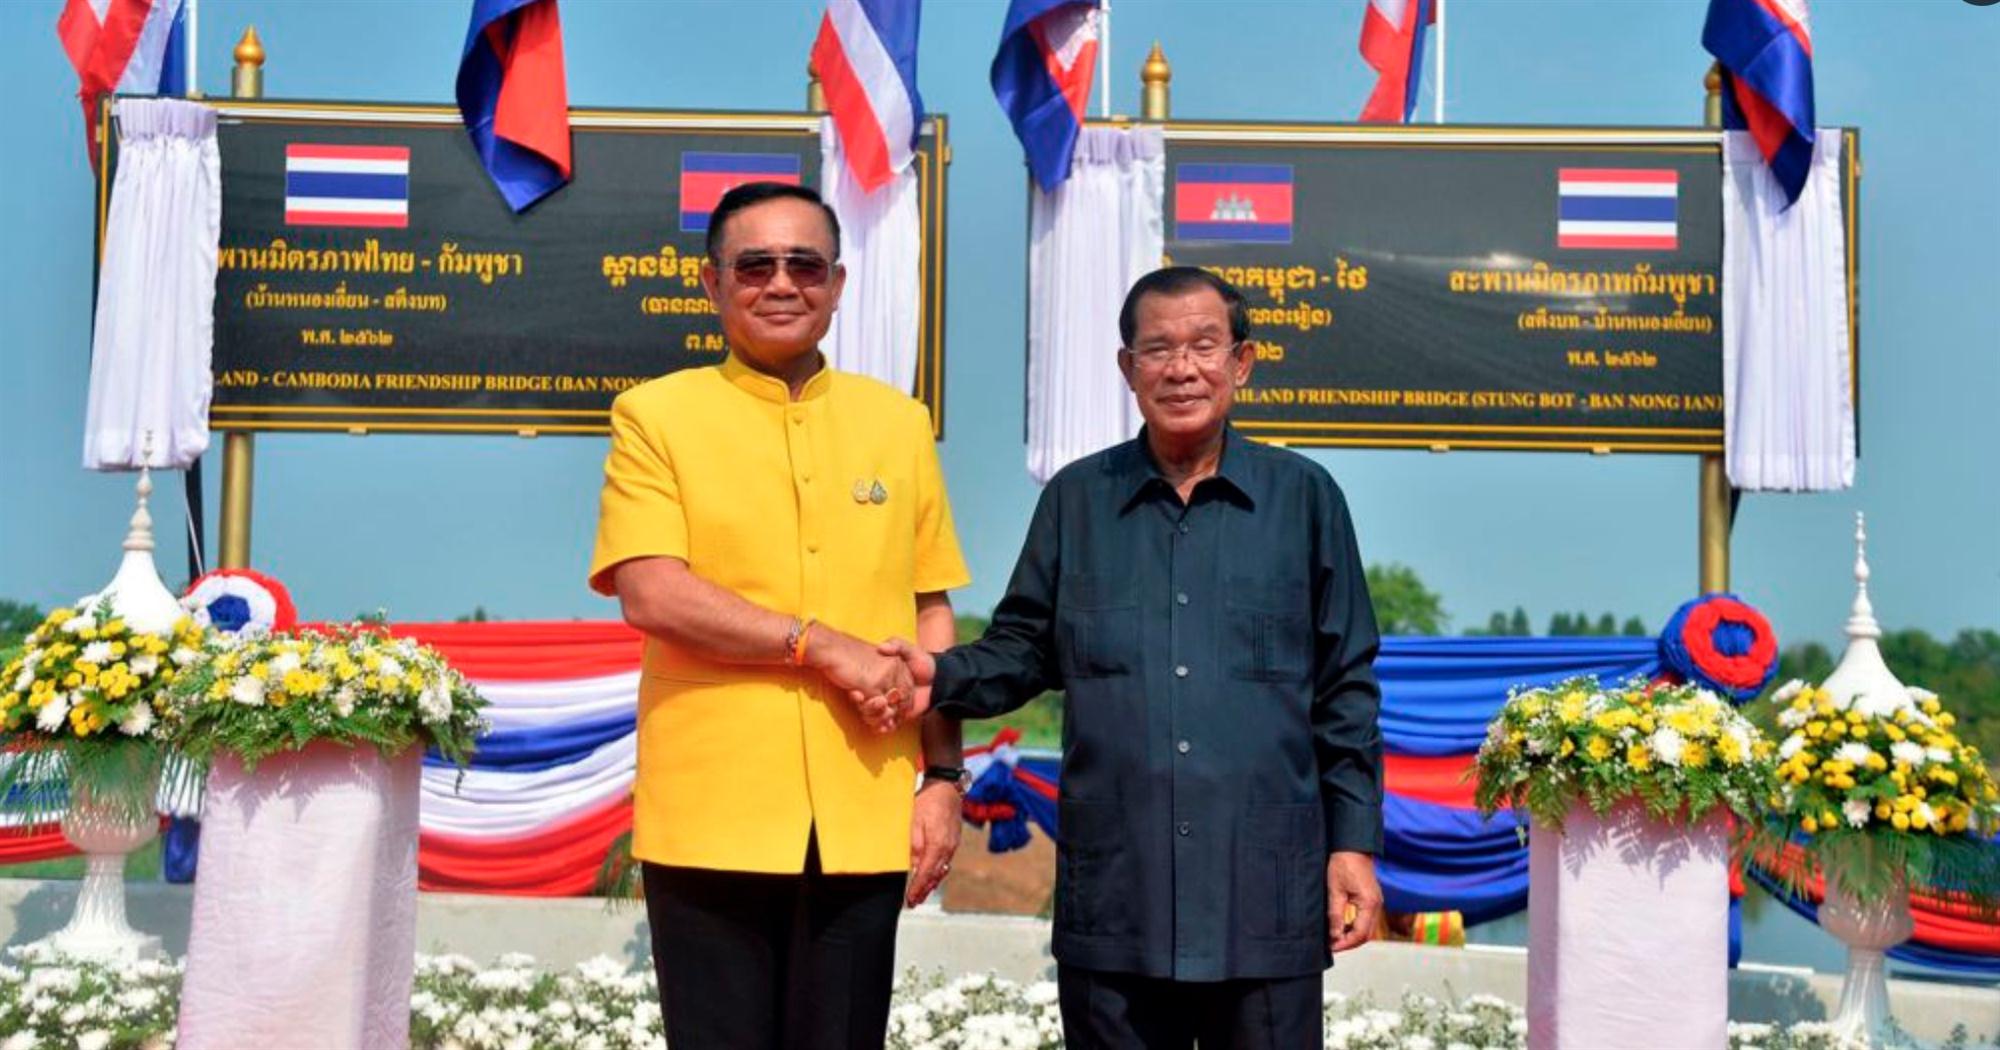 Self Photos / Files - Cambo and Thai Leaders Mark Reopening of Rail Link